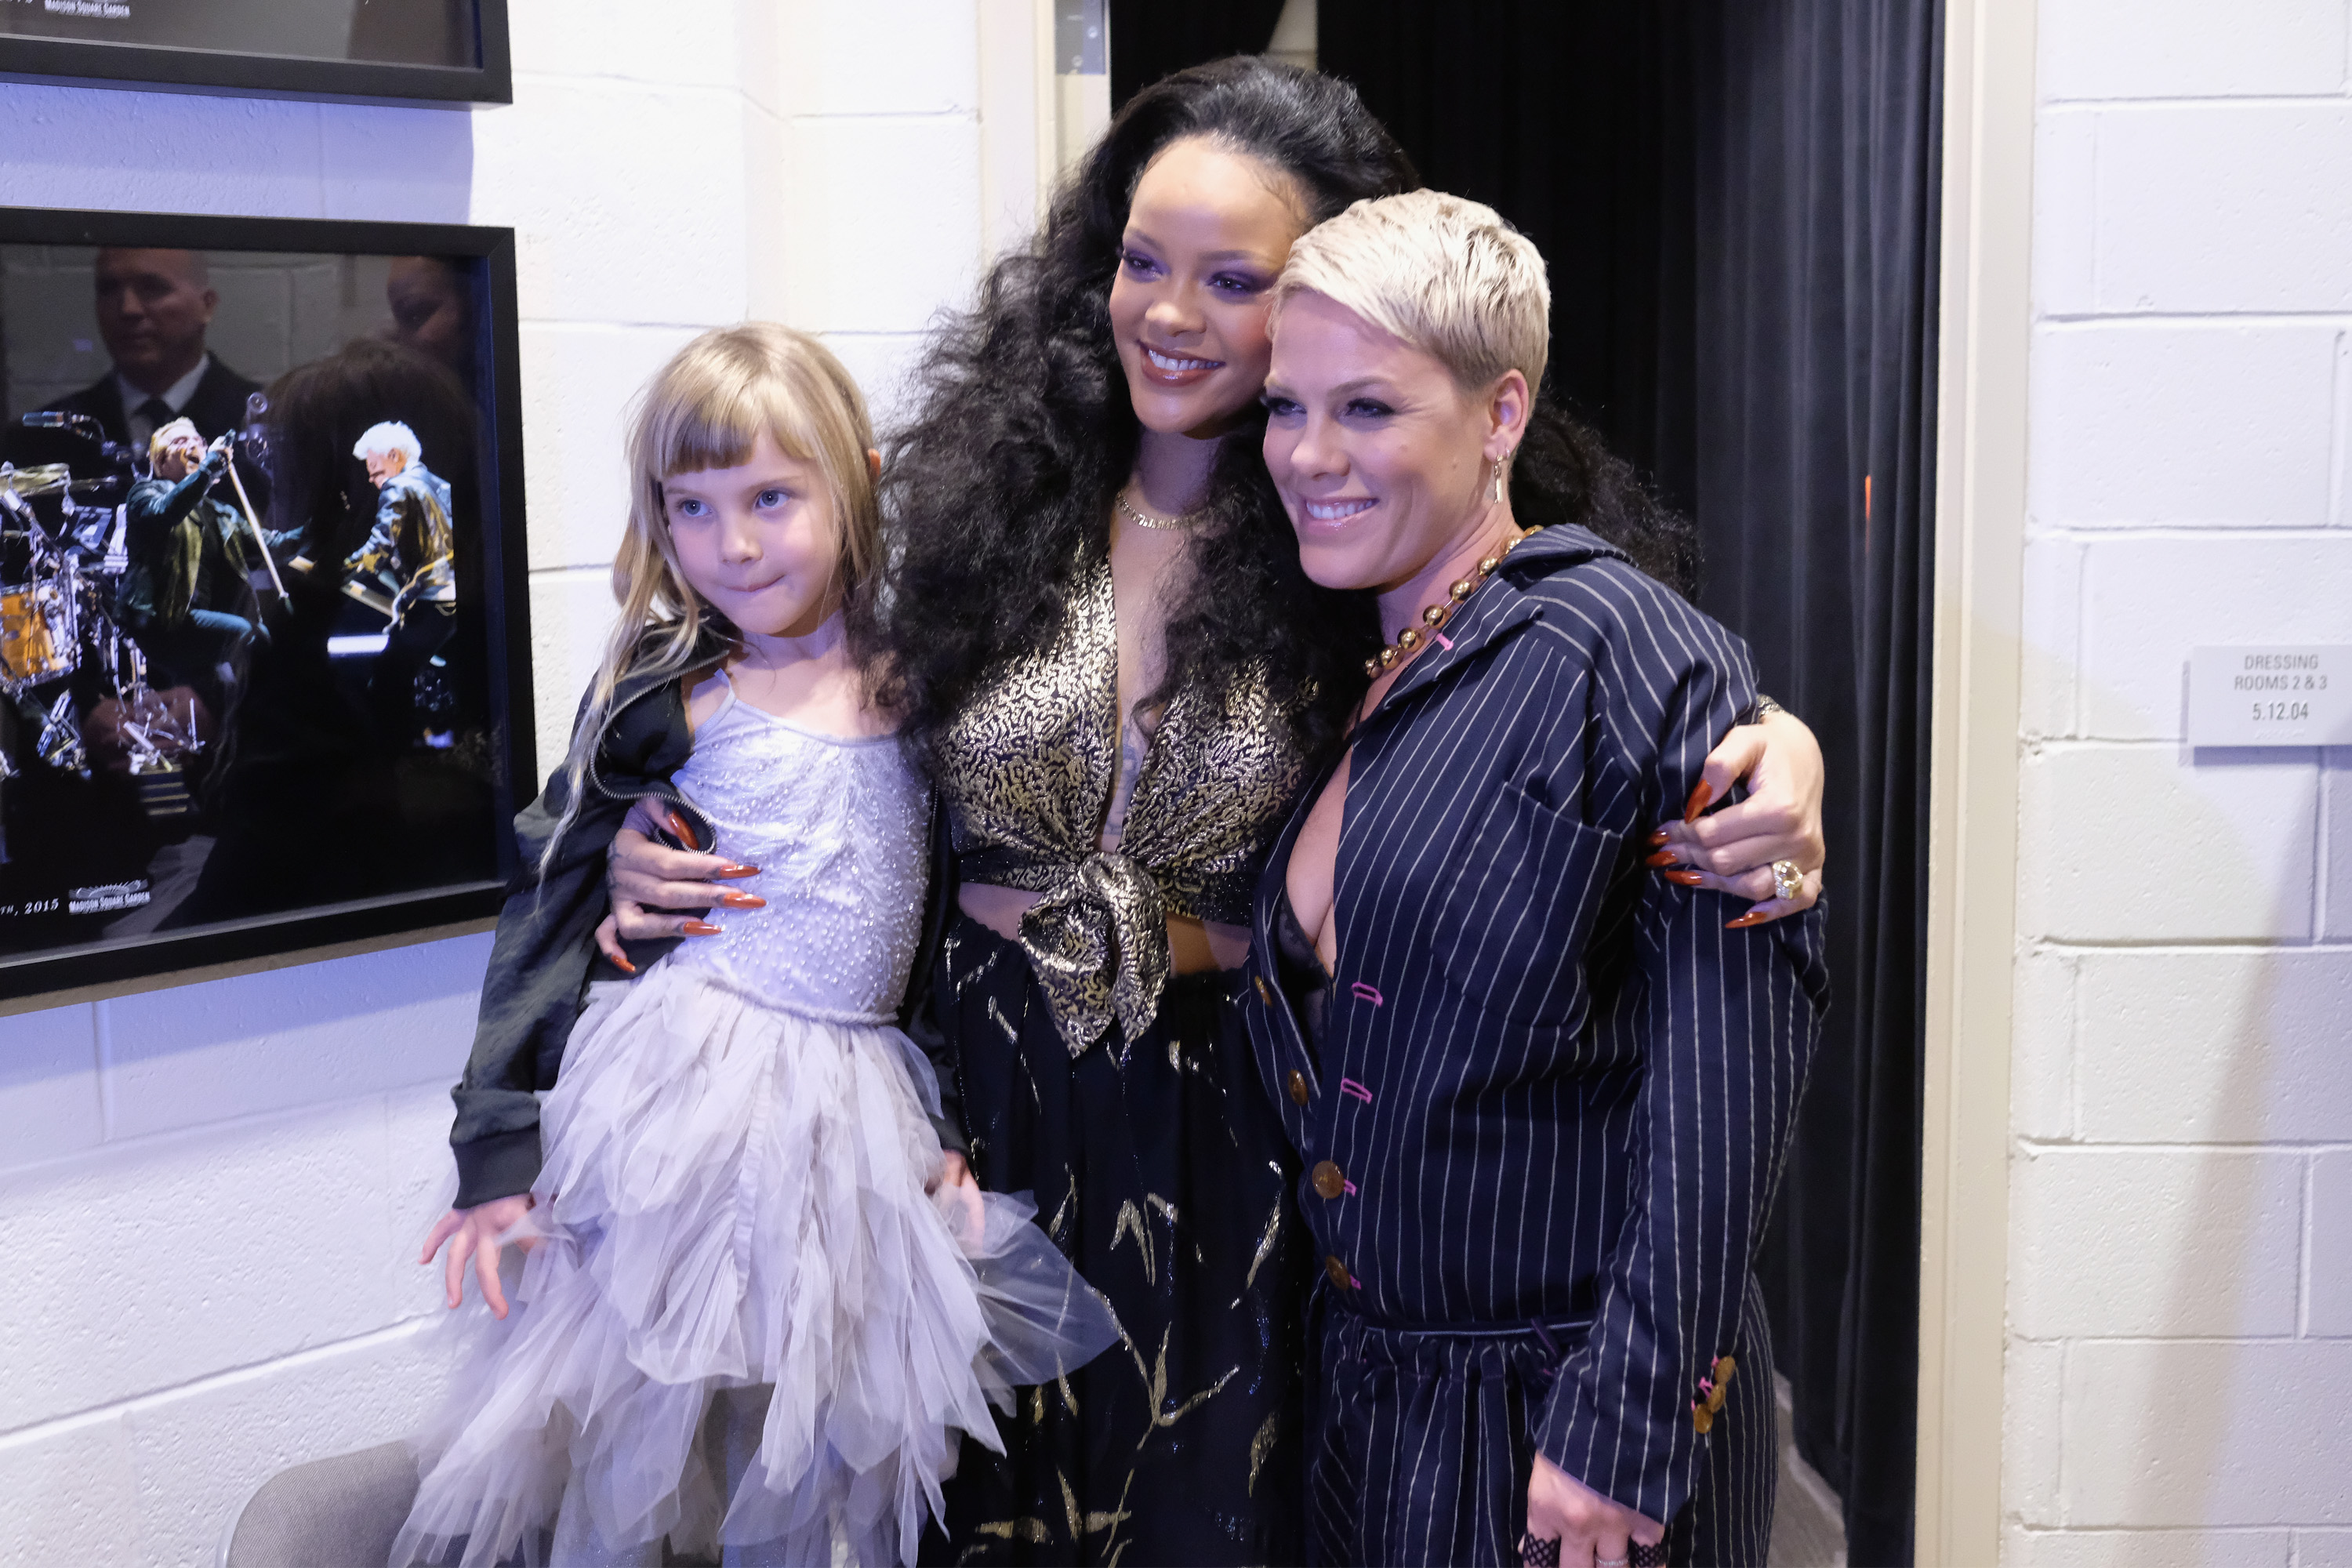 Willow Hart, recording artists Rihanna and Pink backstage at the 60th Annual GRAMMY Awards at Madison Square Garden on January 28, 2018 in New York City. (Nicholas Hunt&mdash;Getty Images for NARAS)